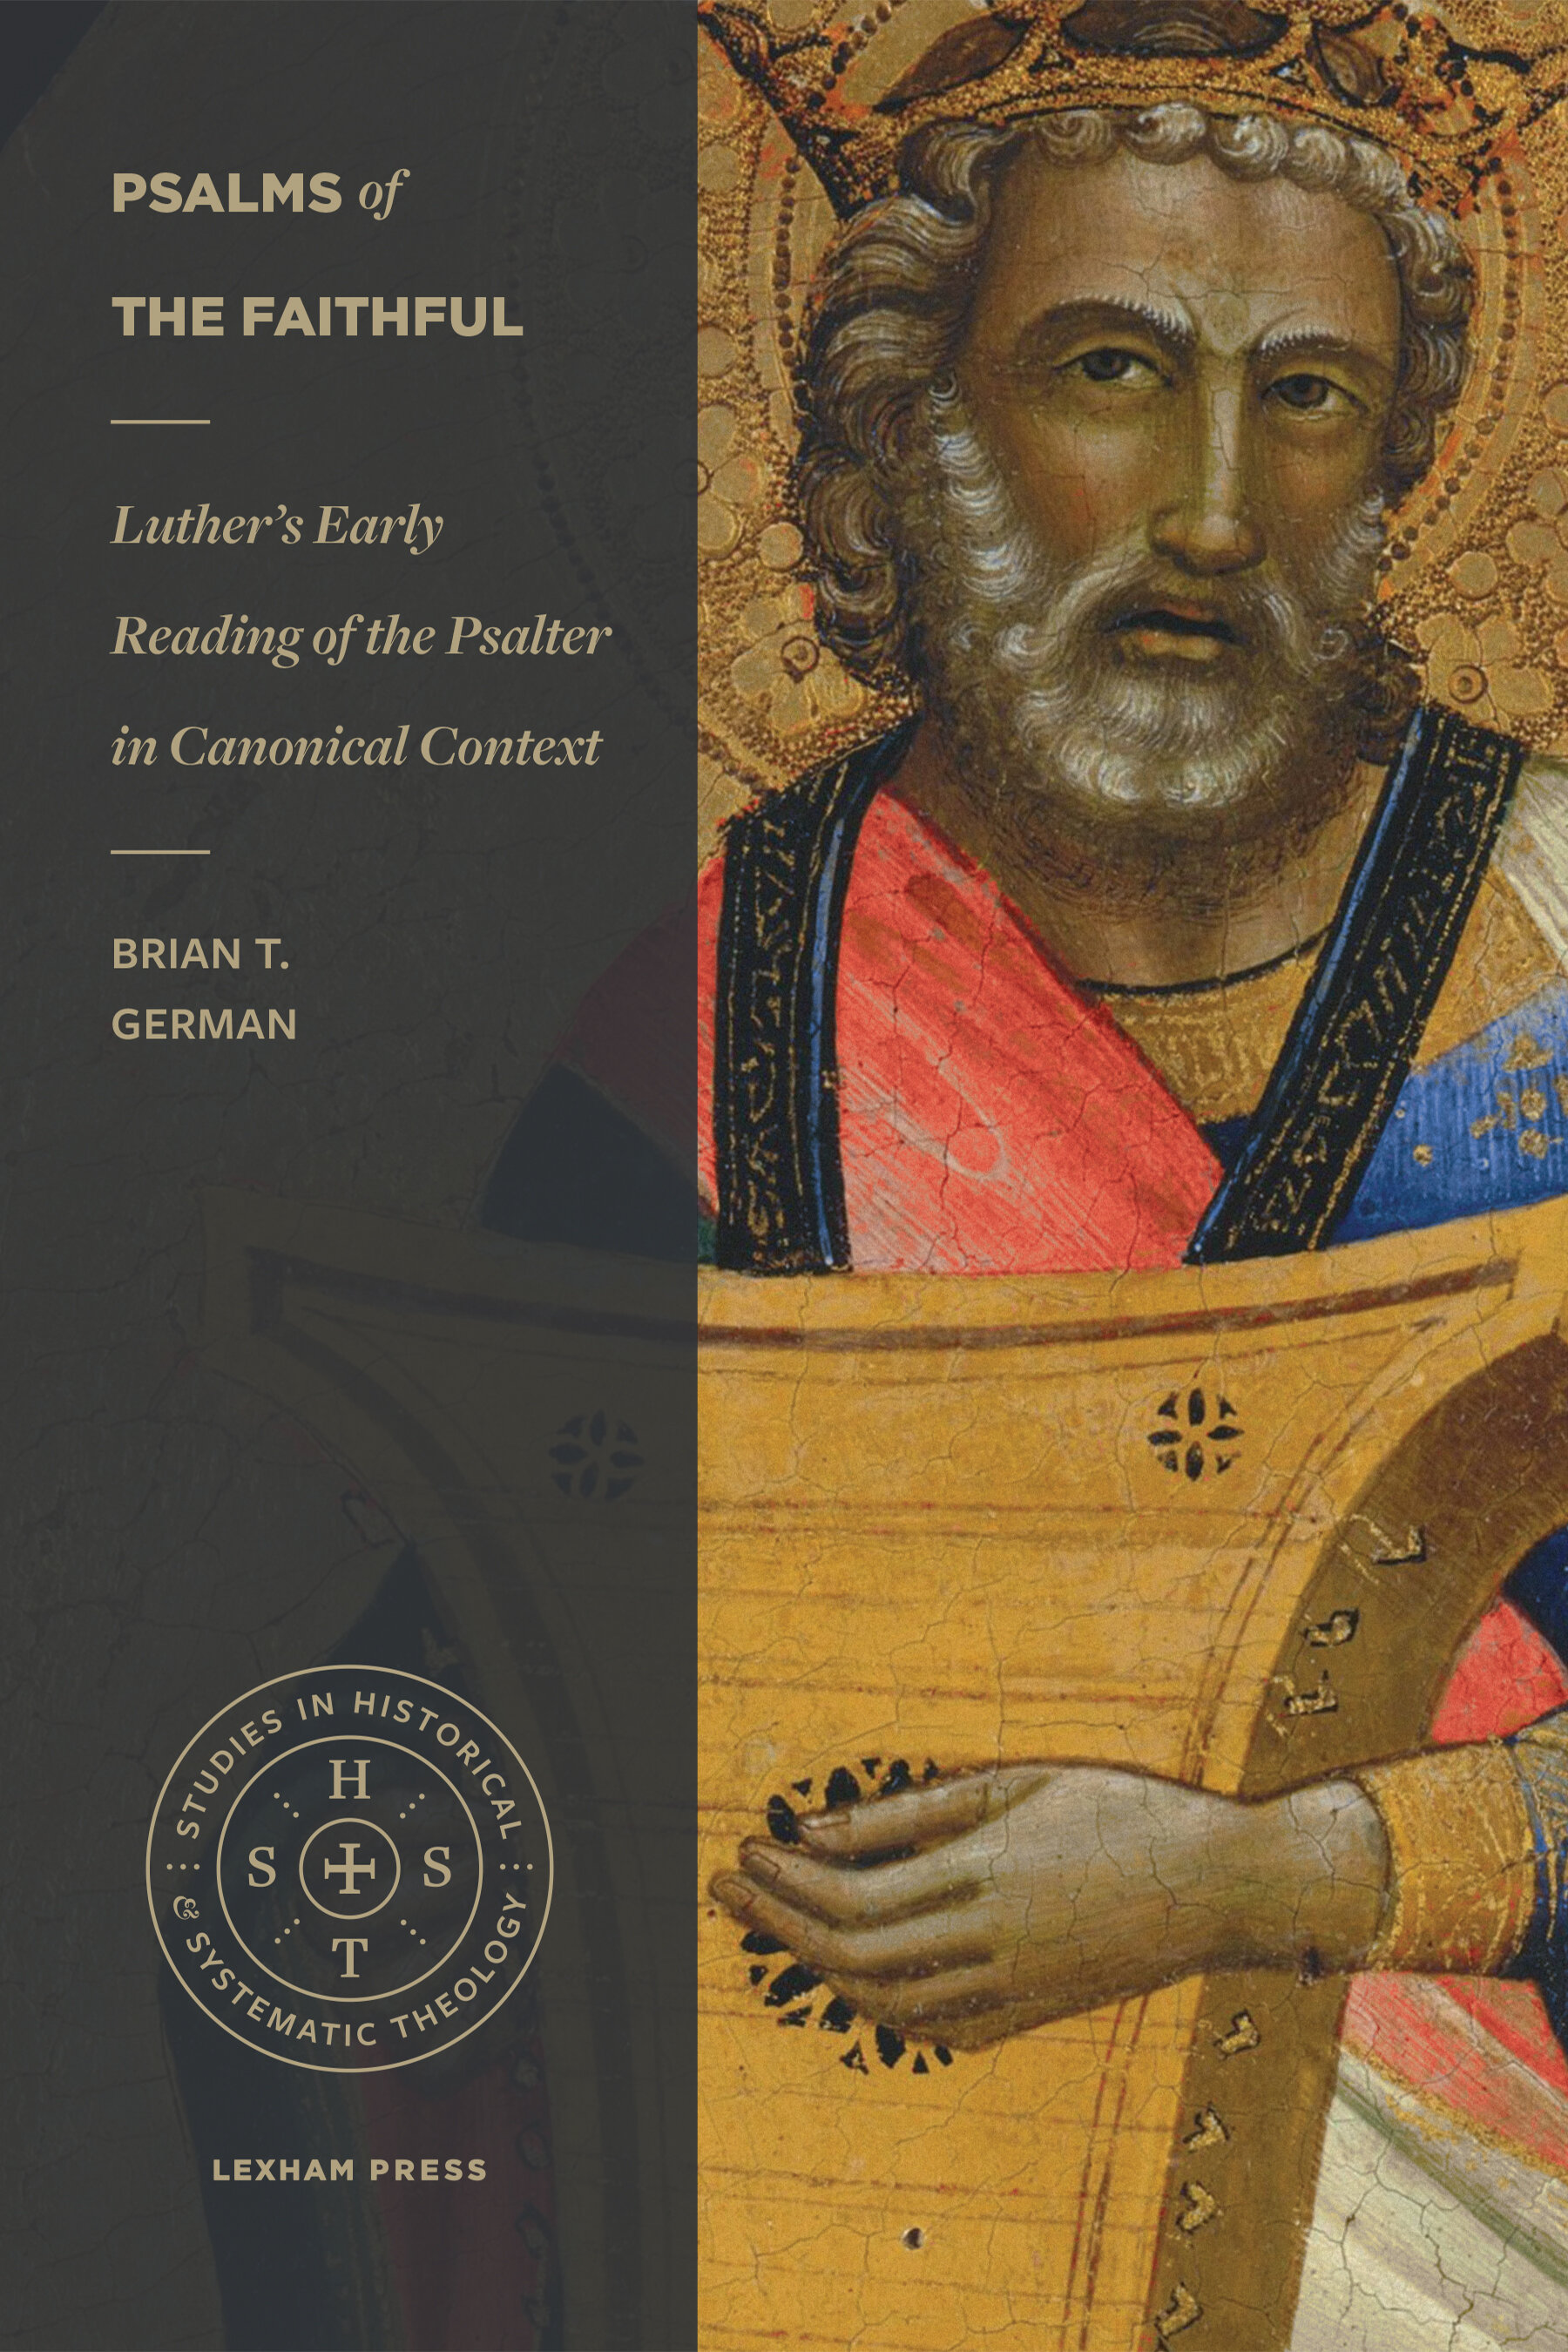 Psalms of the Faithful: Luther’s Early Reading of the Psalter in Canonical Context